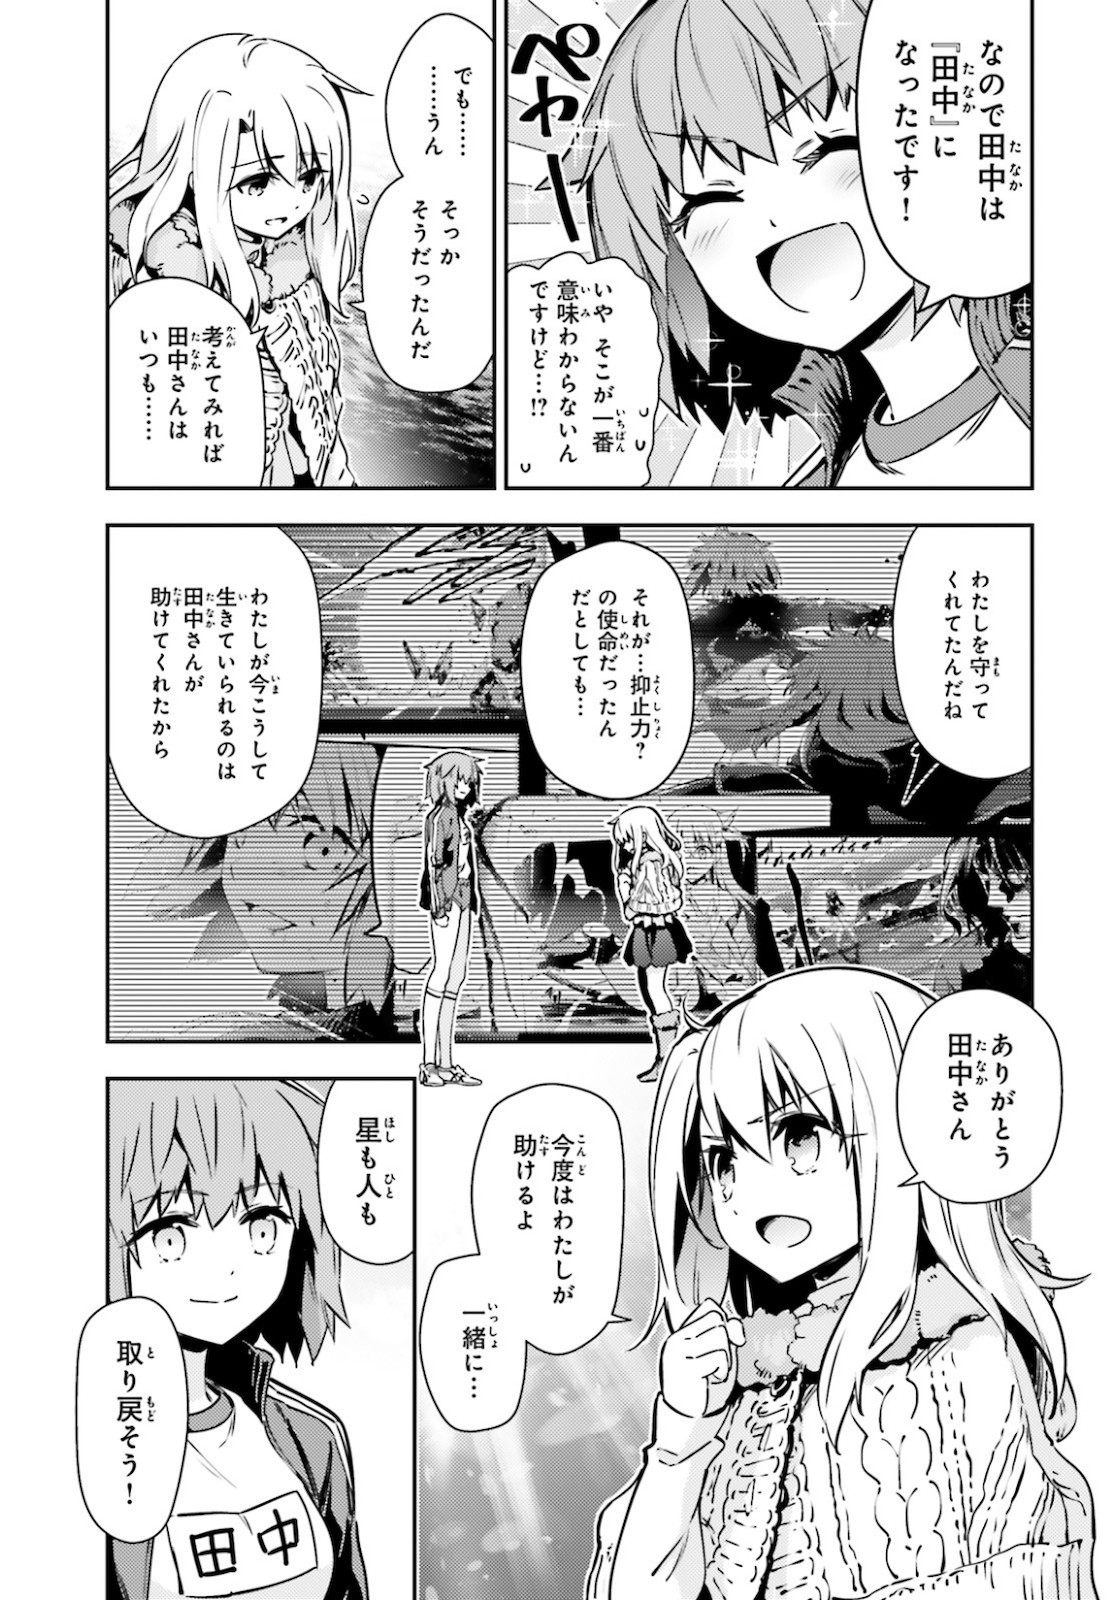 Fate/Kaleid Liner Prisma Illya Drei! - Chapter 62-2 - Page 2